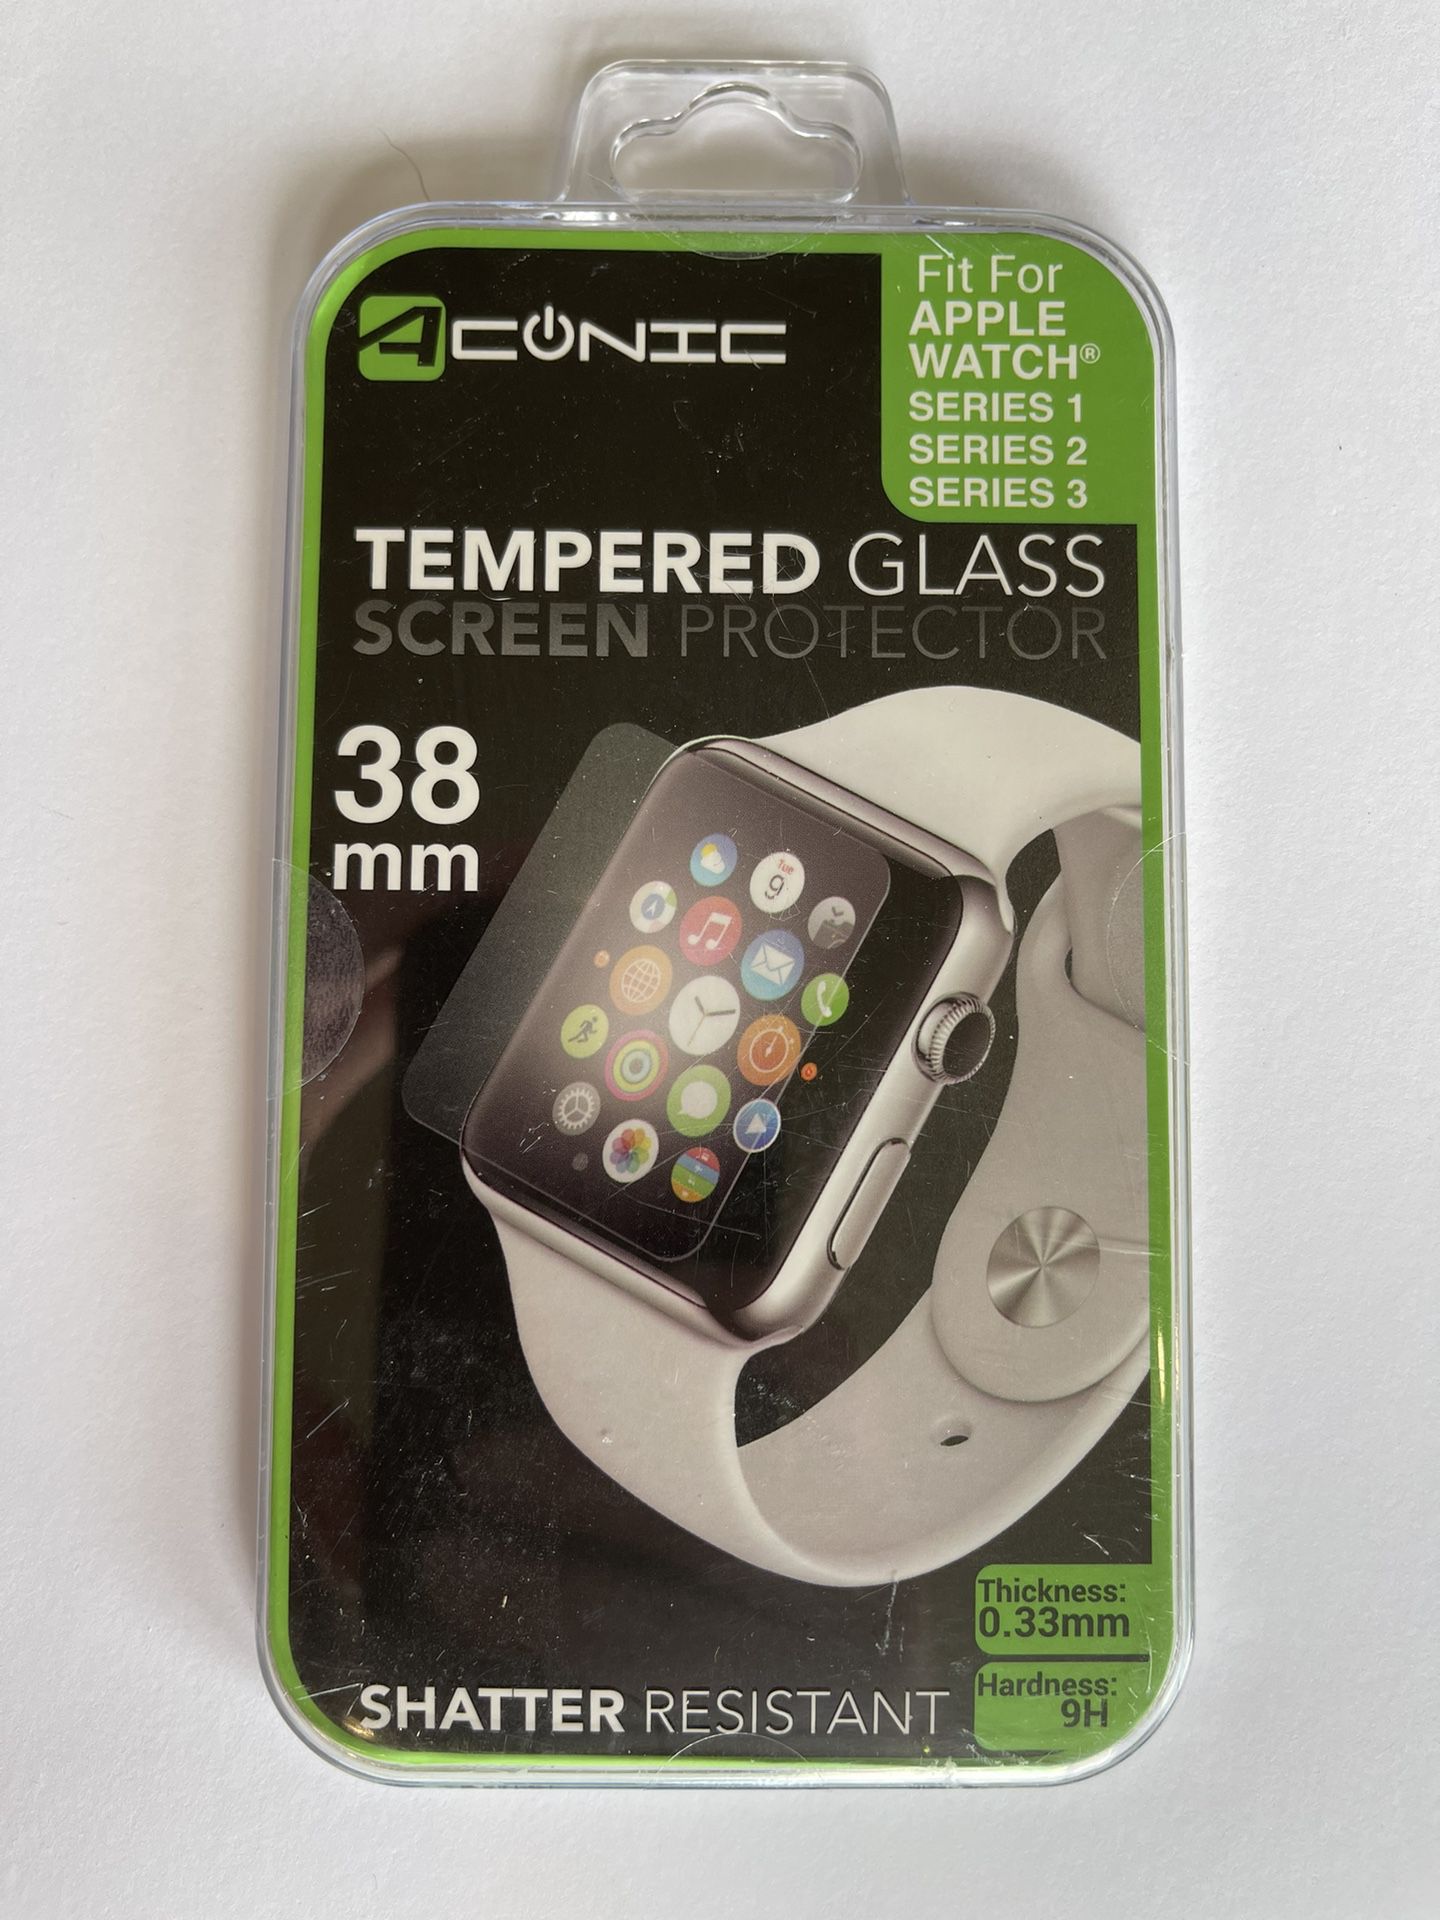 ACONIC Tempered Glass Screen Protector for Apple Watch Series 1, 2, 3 - 38mm - NEW